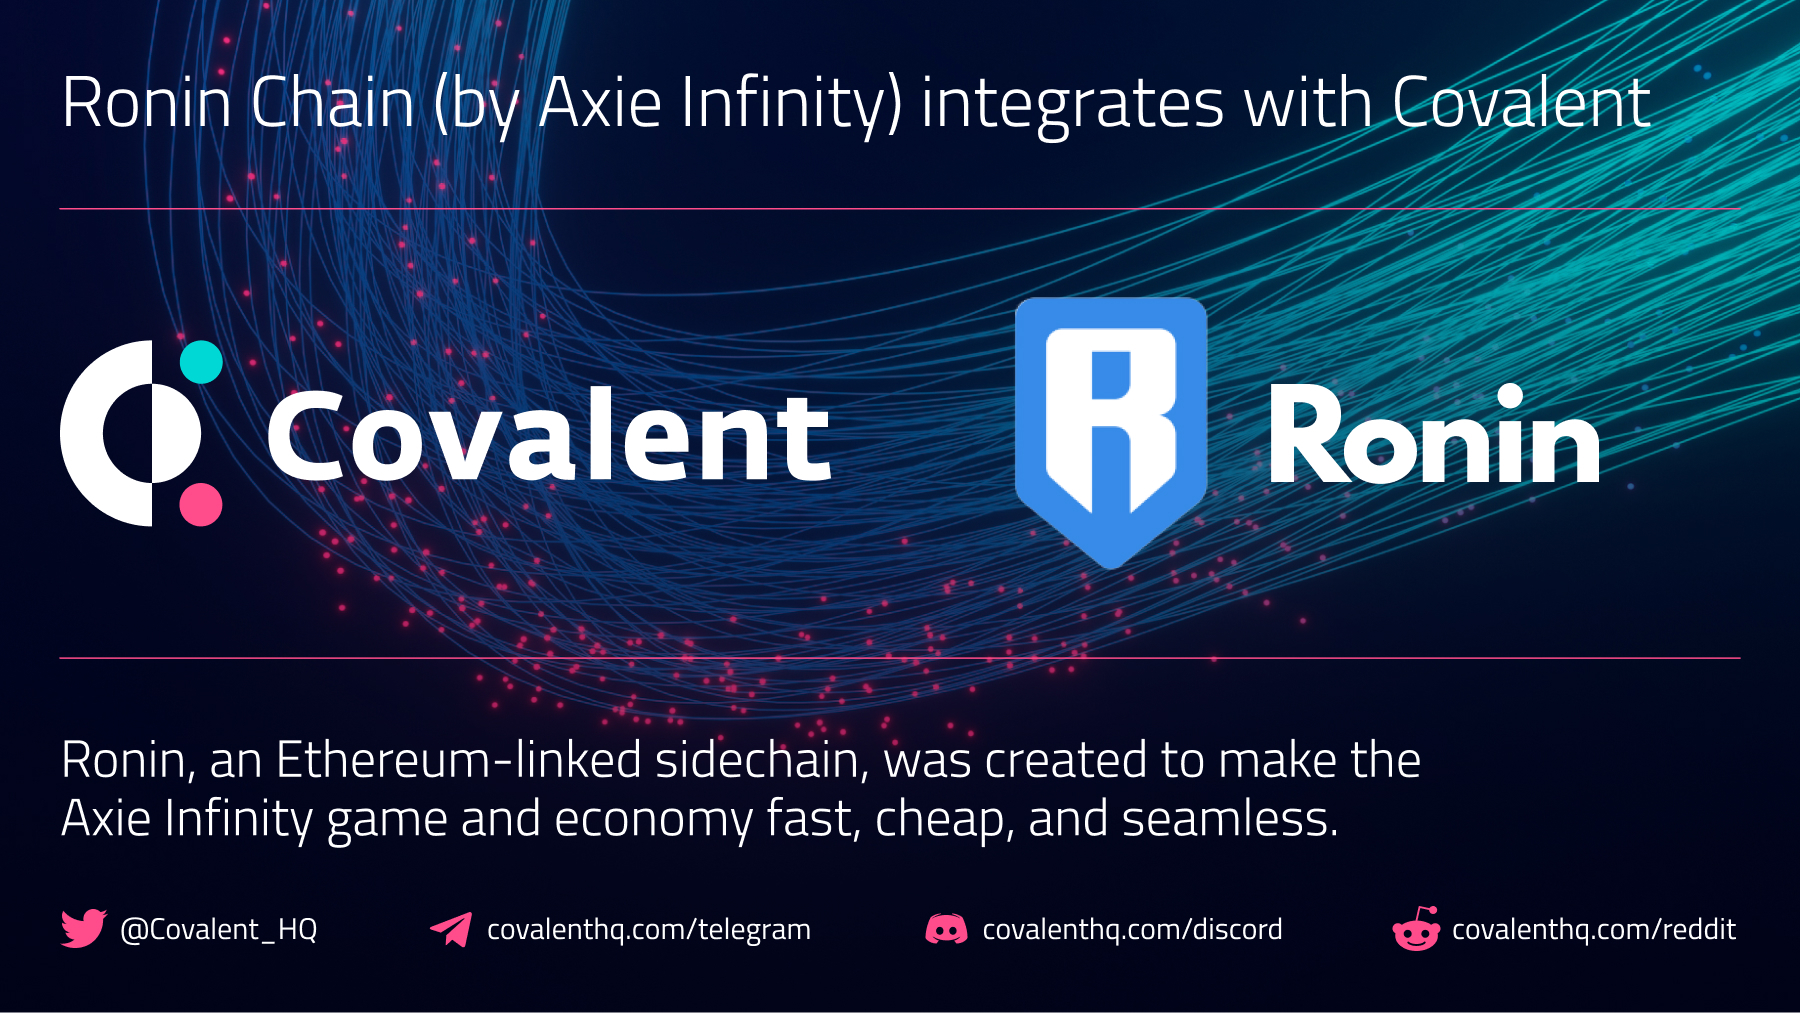 Ronin Chain (by Axie Infinity) Integrates with Covalent